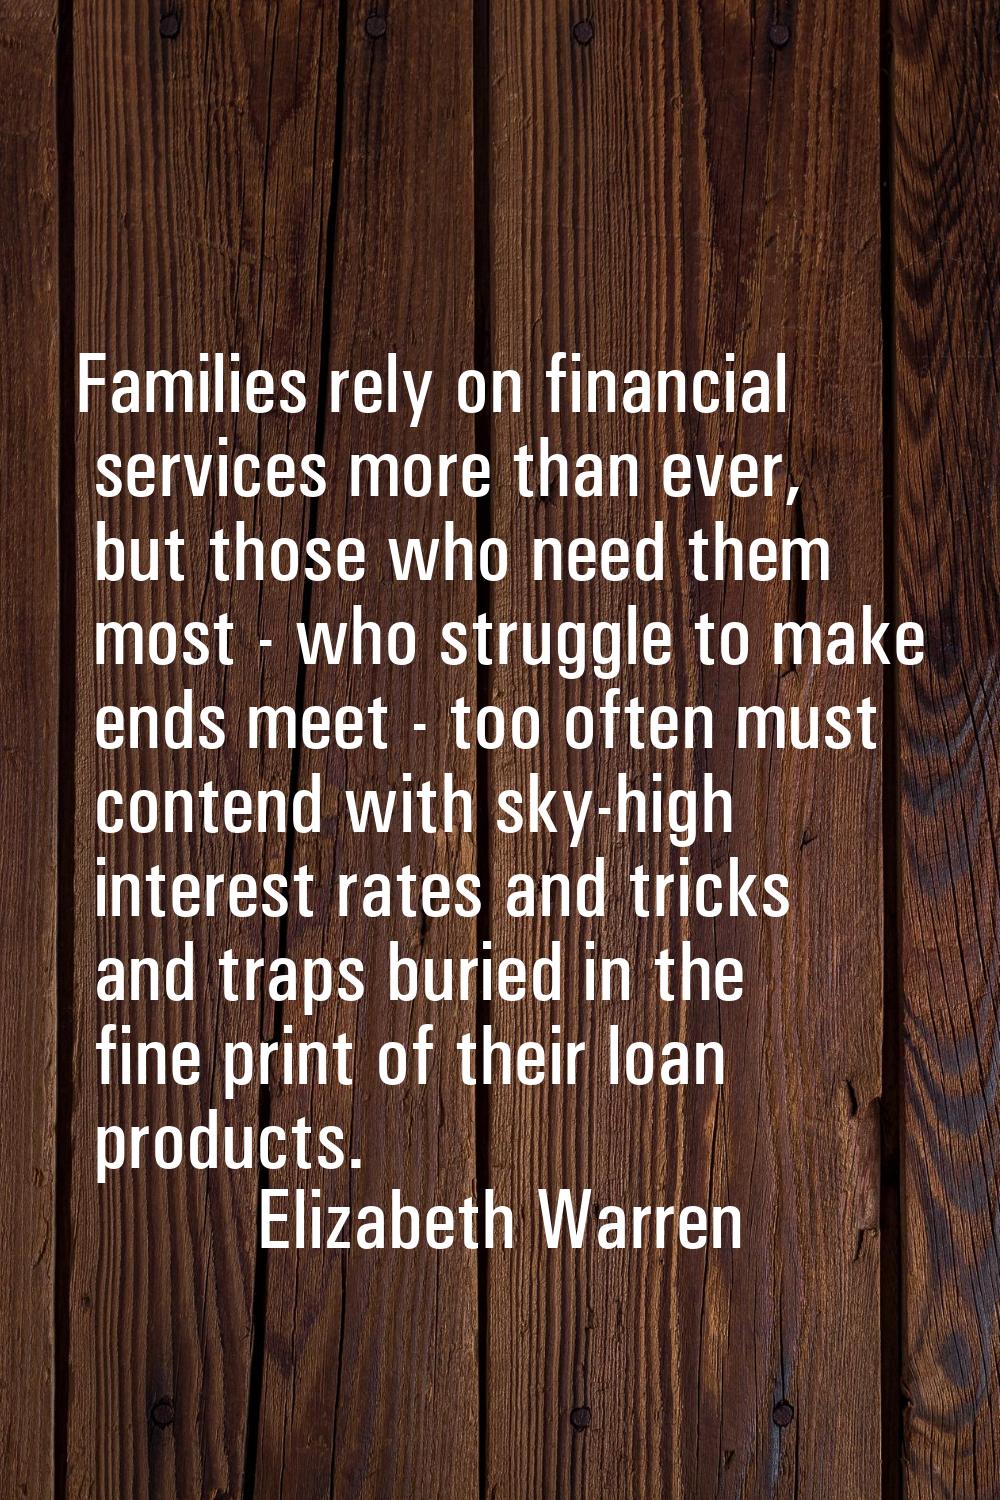 Families rely on financial services more than ever, but those who need them most - who struggle to 